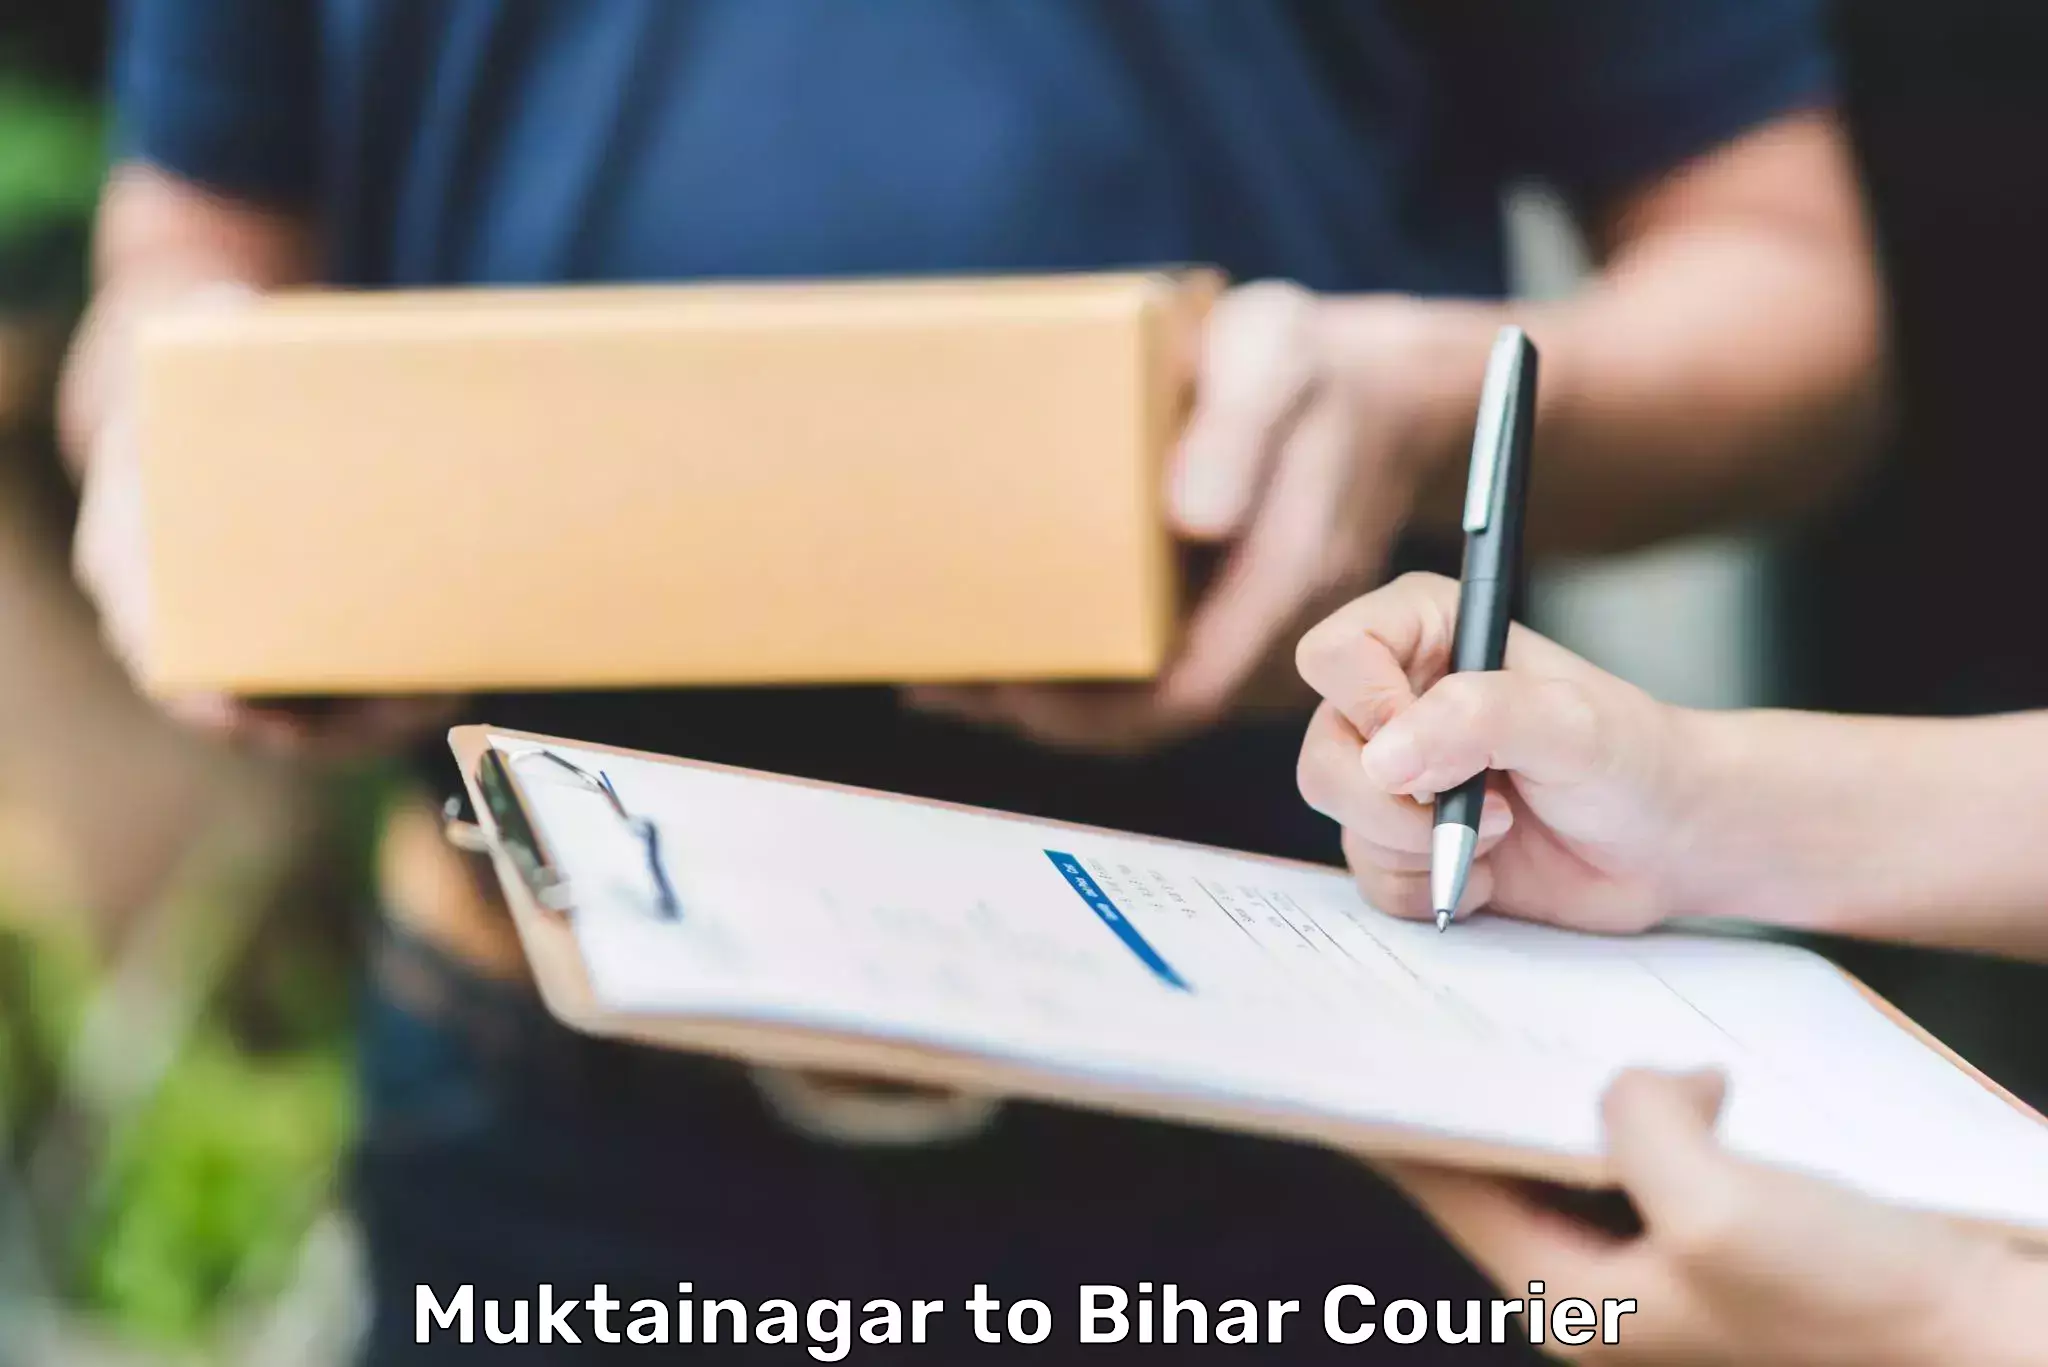 State-of-the-art courier technology Muktainagar to Bankipore